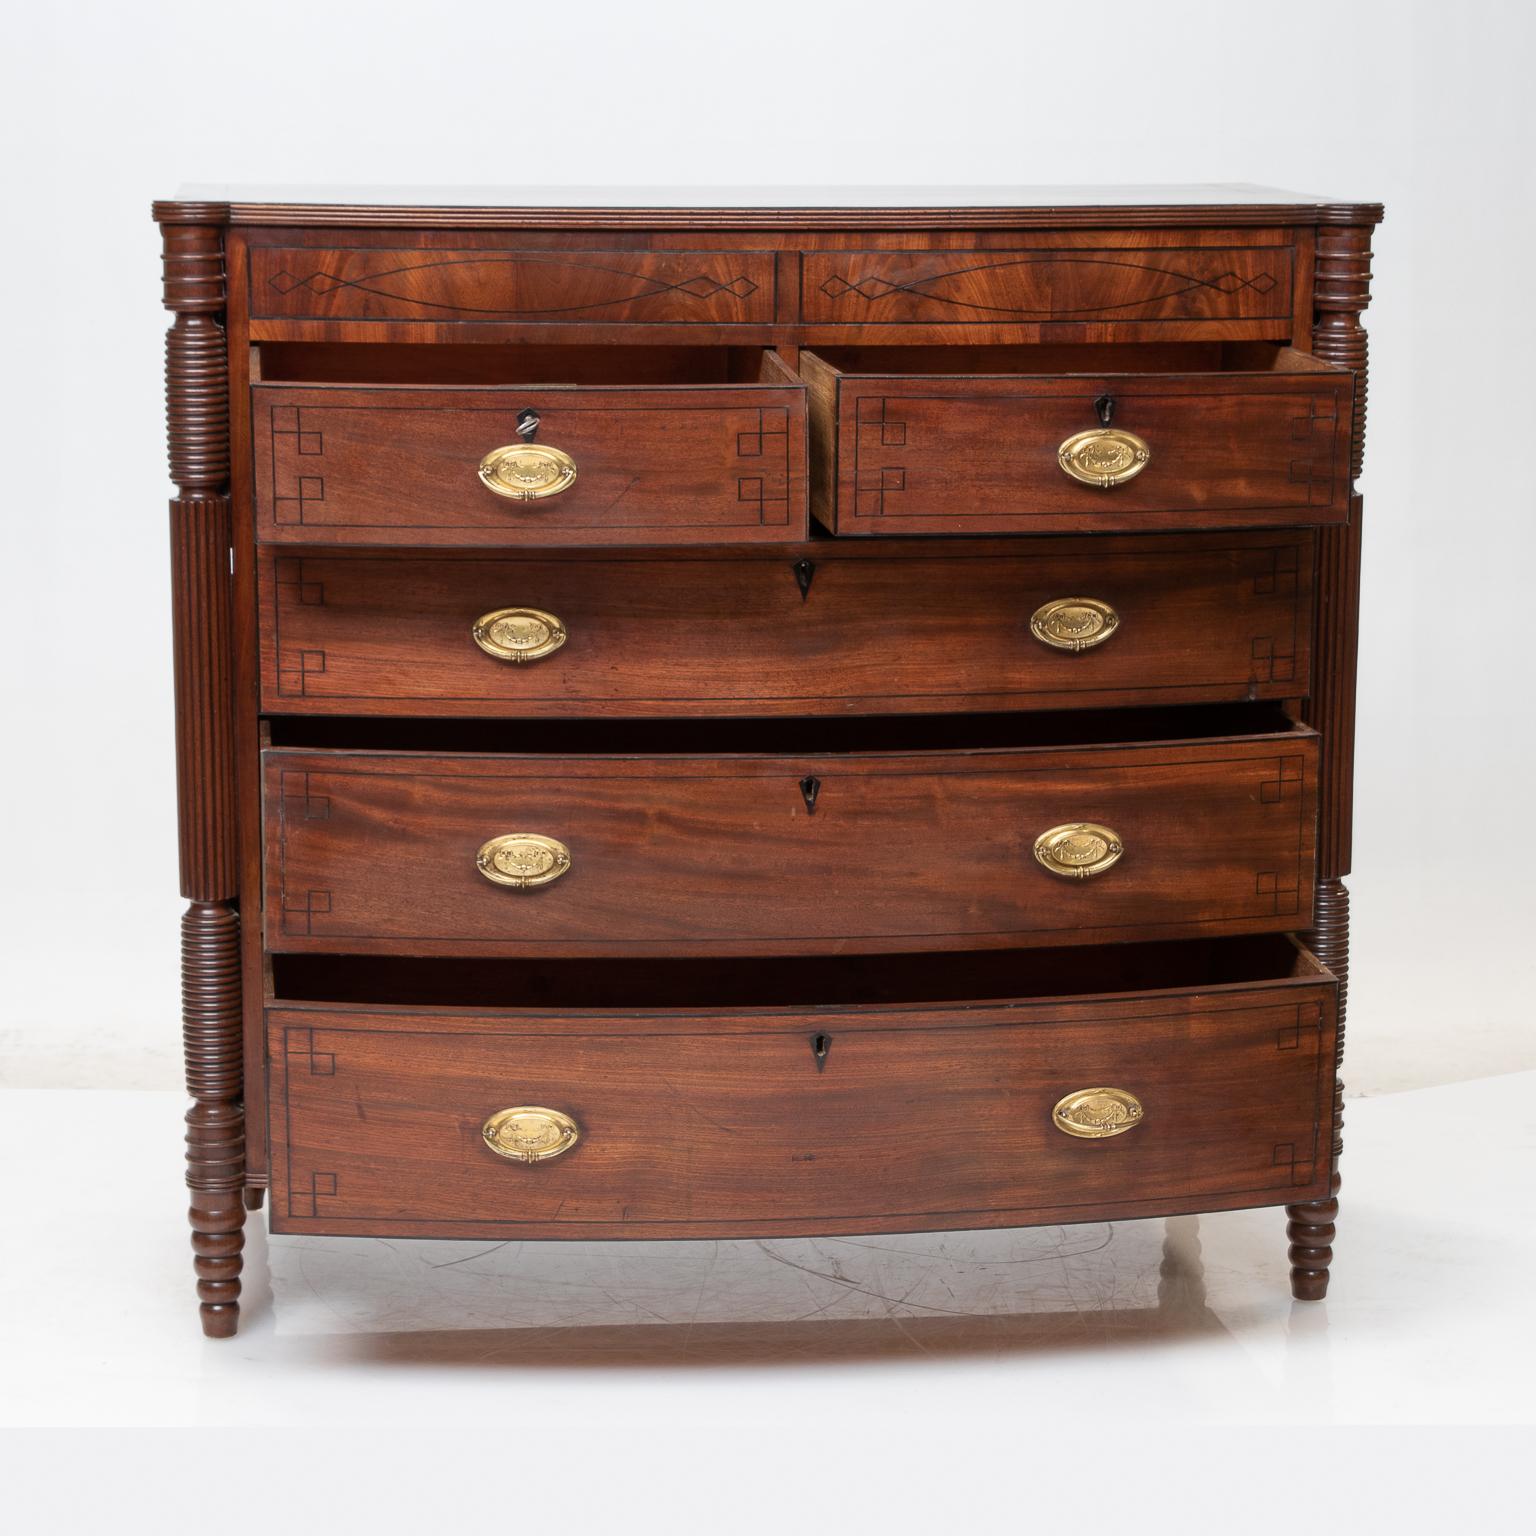 19th century regency chest of drawers
An elegant English regency mahogany chest of drawers. The chest detailed with intricate ebony string inlay, brass oval pulls, banded with choice flamed mahogany veneer's (the veneer is of thicker cuts of wood),